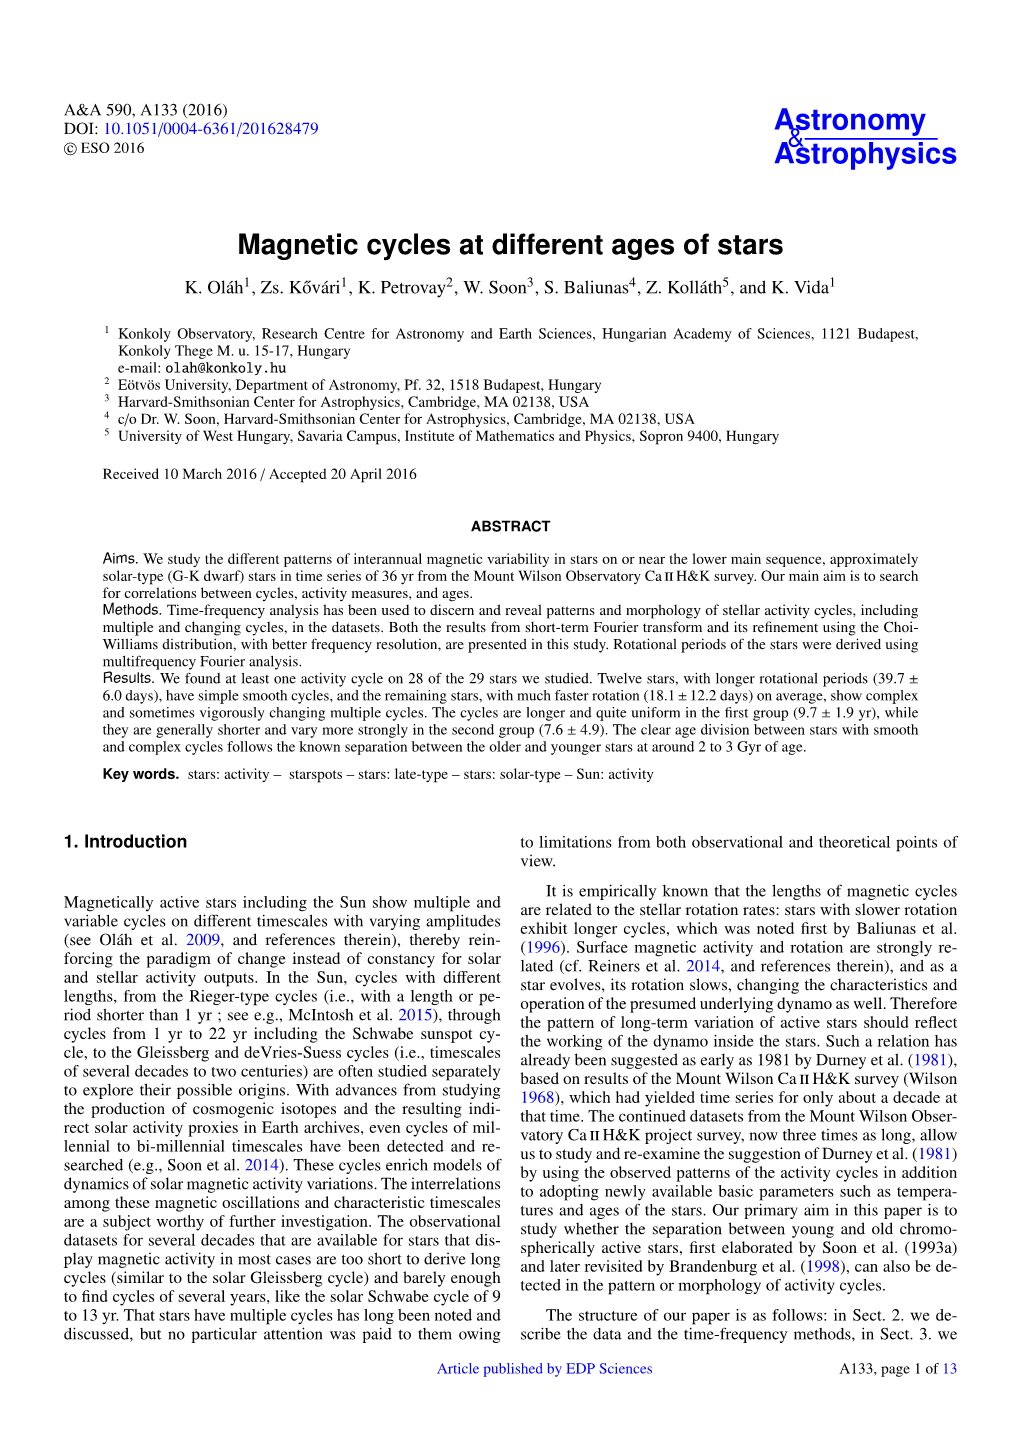 Magnetic Cycles at Different Ages of Stars K